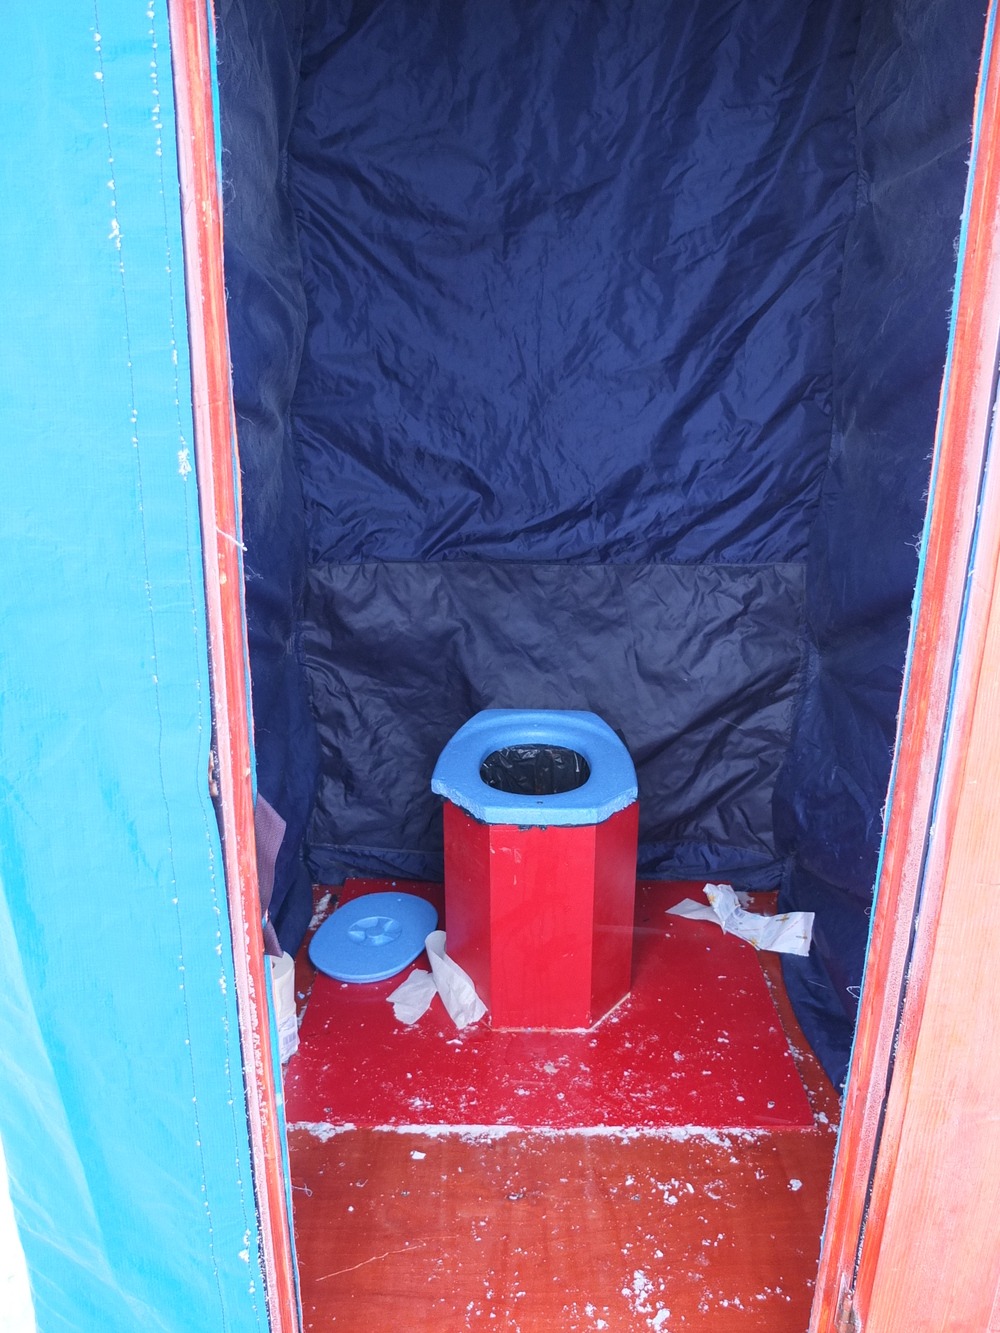 Our luxury toilet facilities